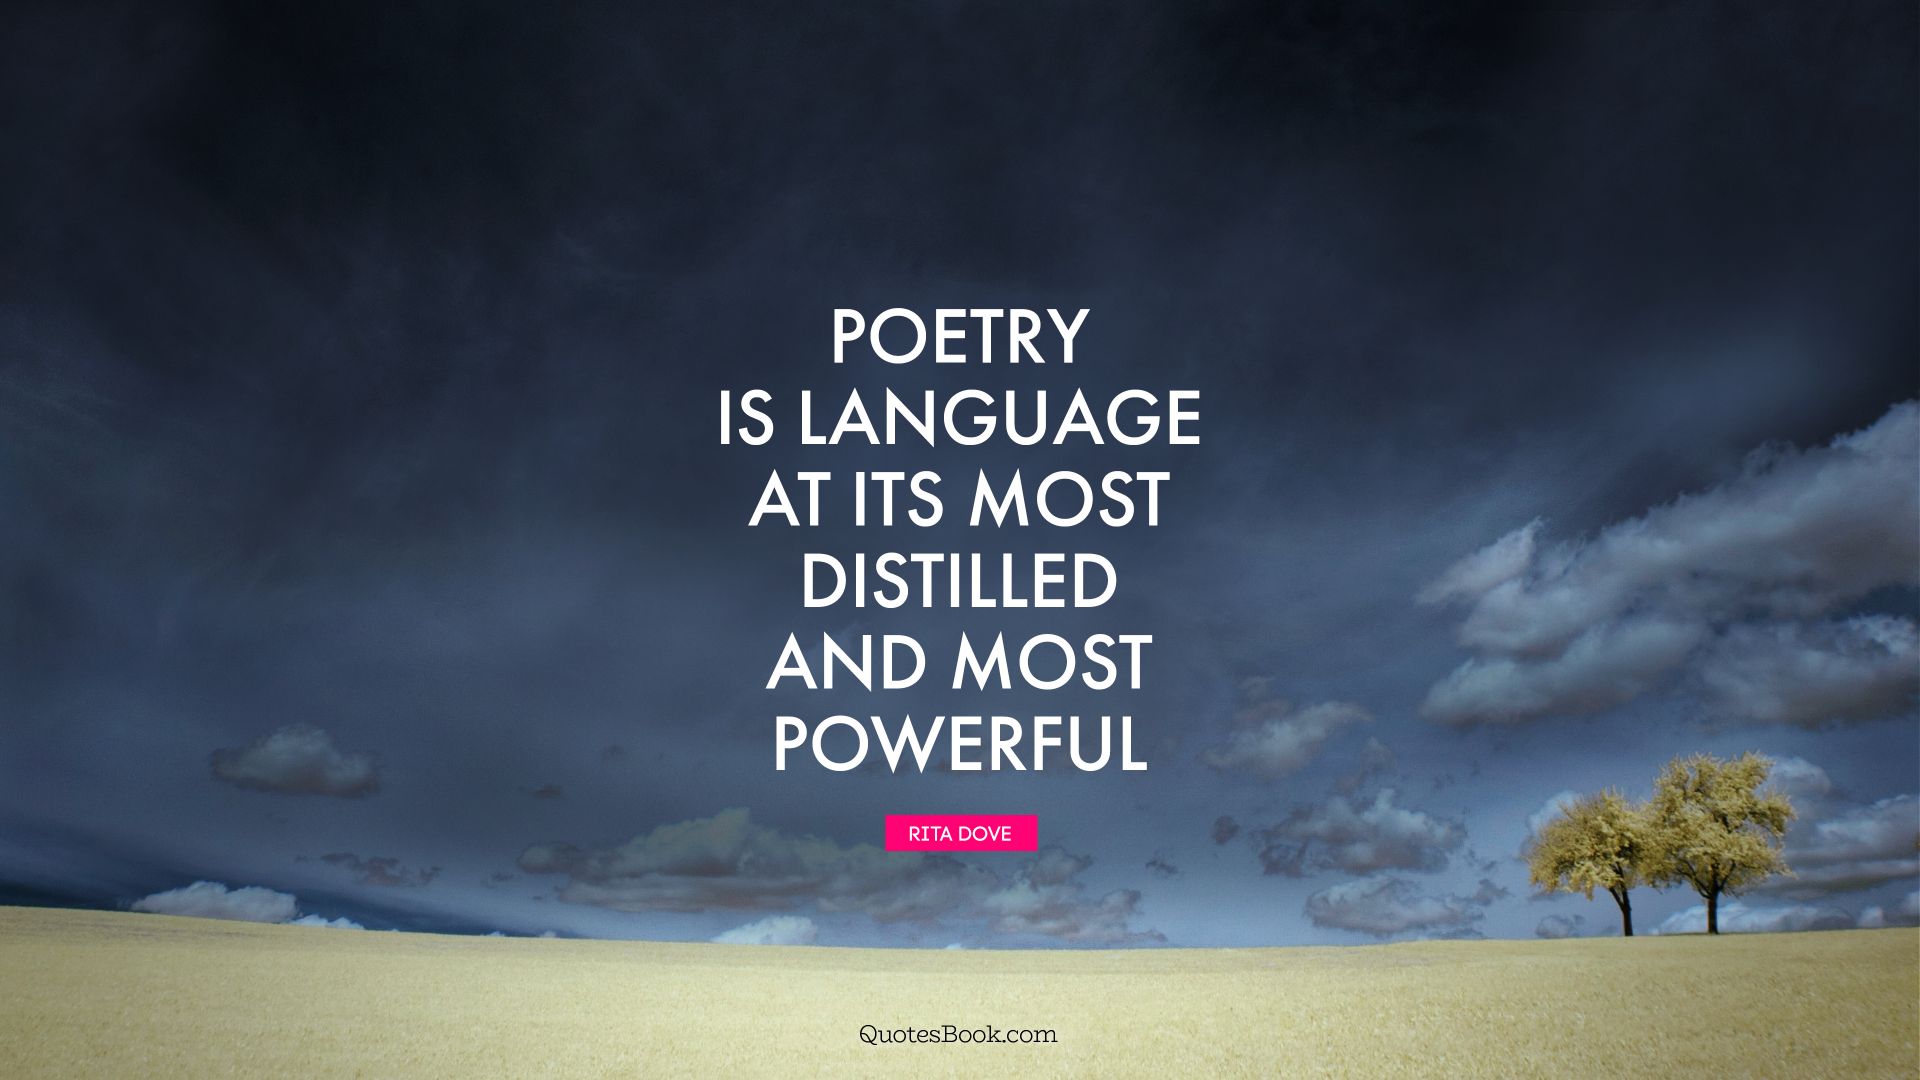 Poetry is language at its most distilled and most powerful. - Quote by Rita Dove